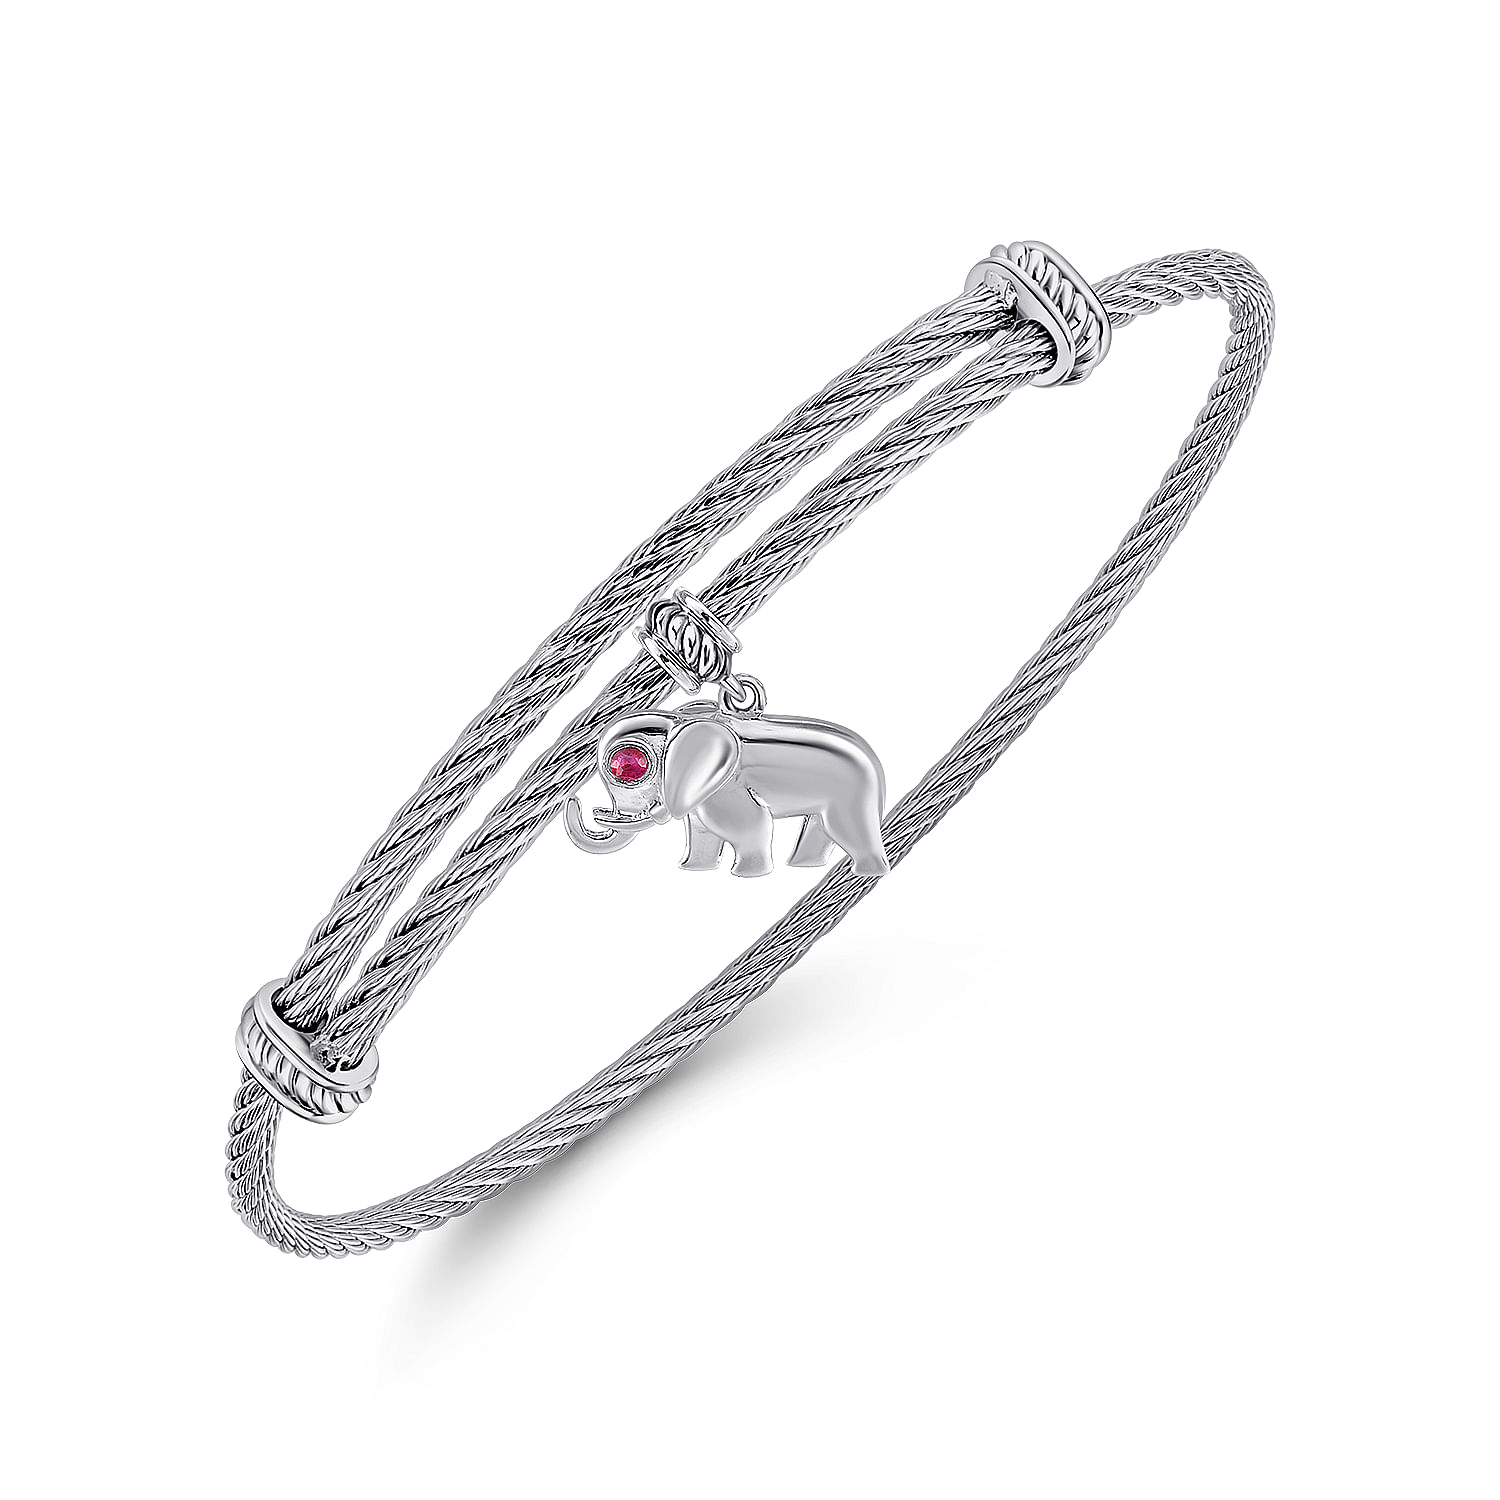 Adjustable Twisted Cable Stainless Steel Bangle with Sterling Silver Ruby Elephant Charm